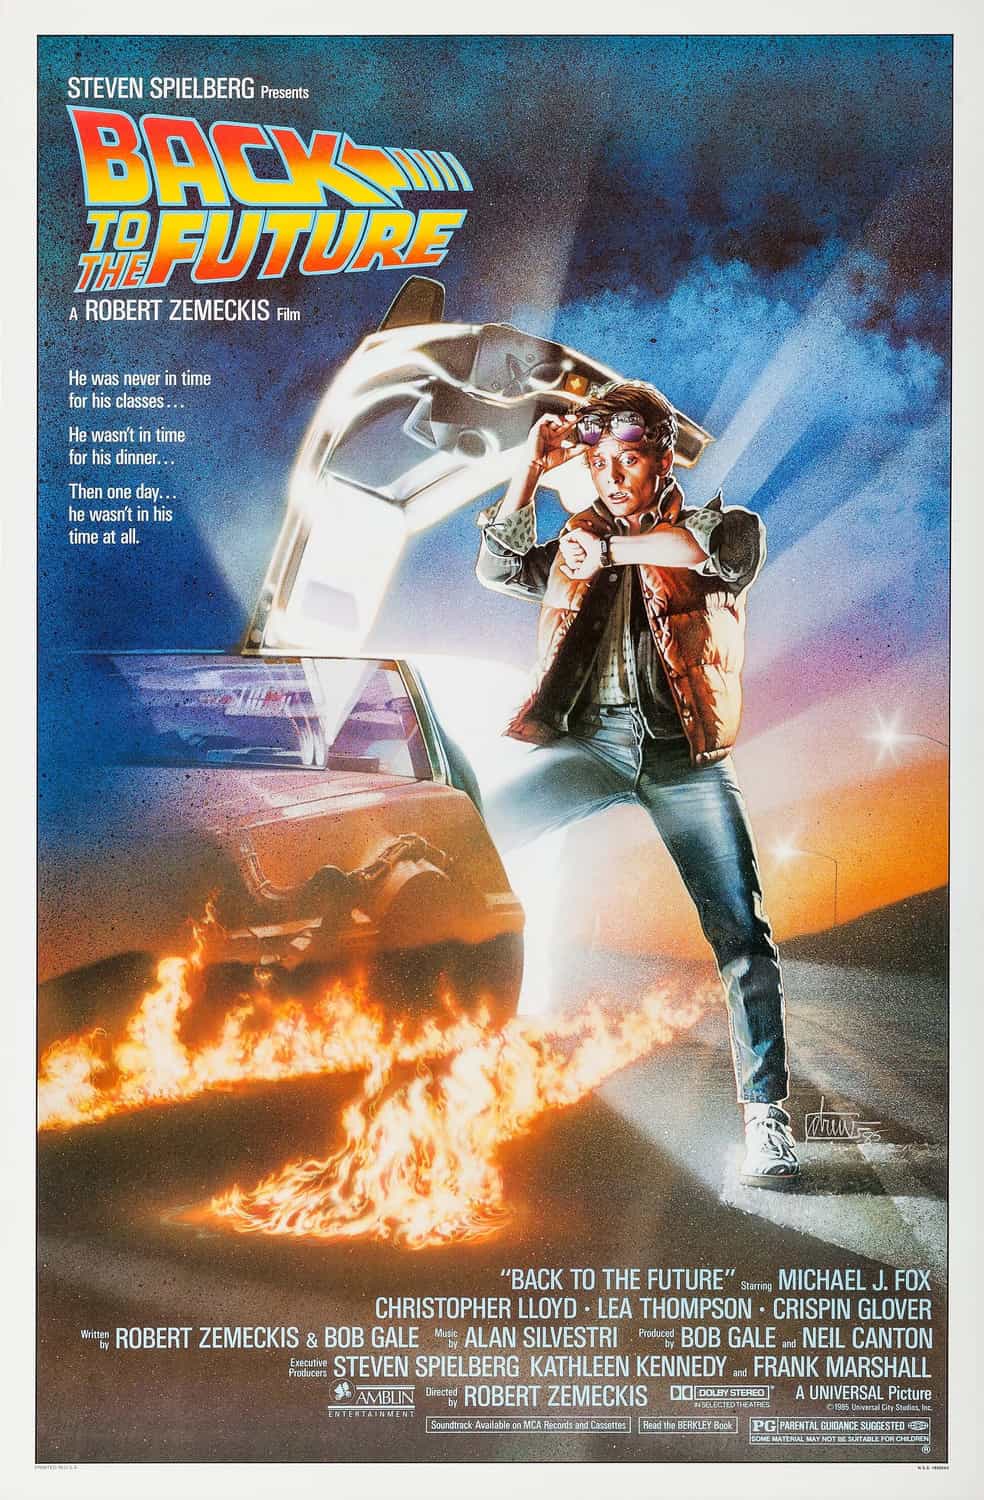 Are you ready to go Back to the Future with Secret Cinema, get your tickets now